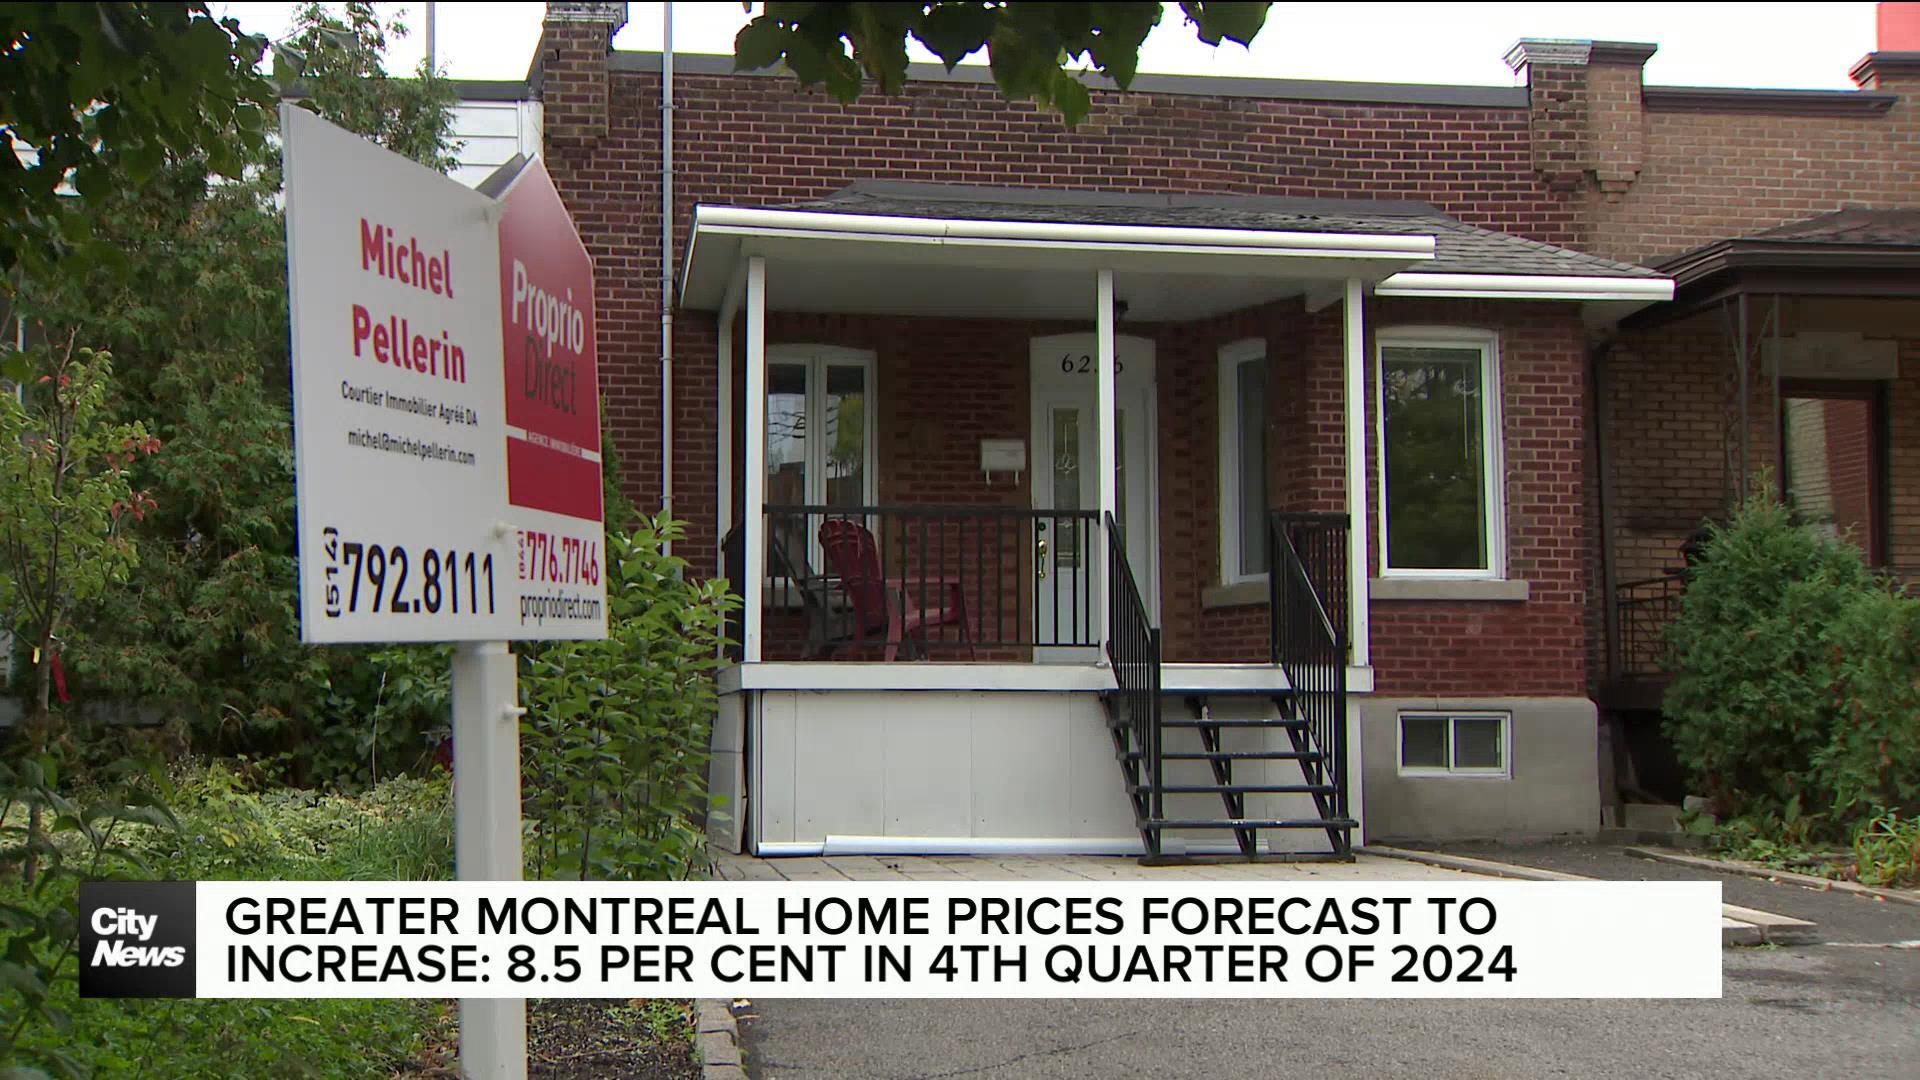 Housing prices in Greater Montreal could rise by 8.5 per cent in 2024